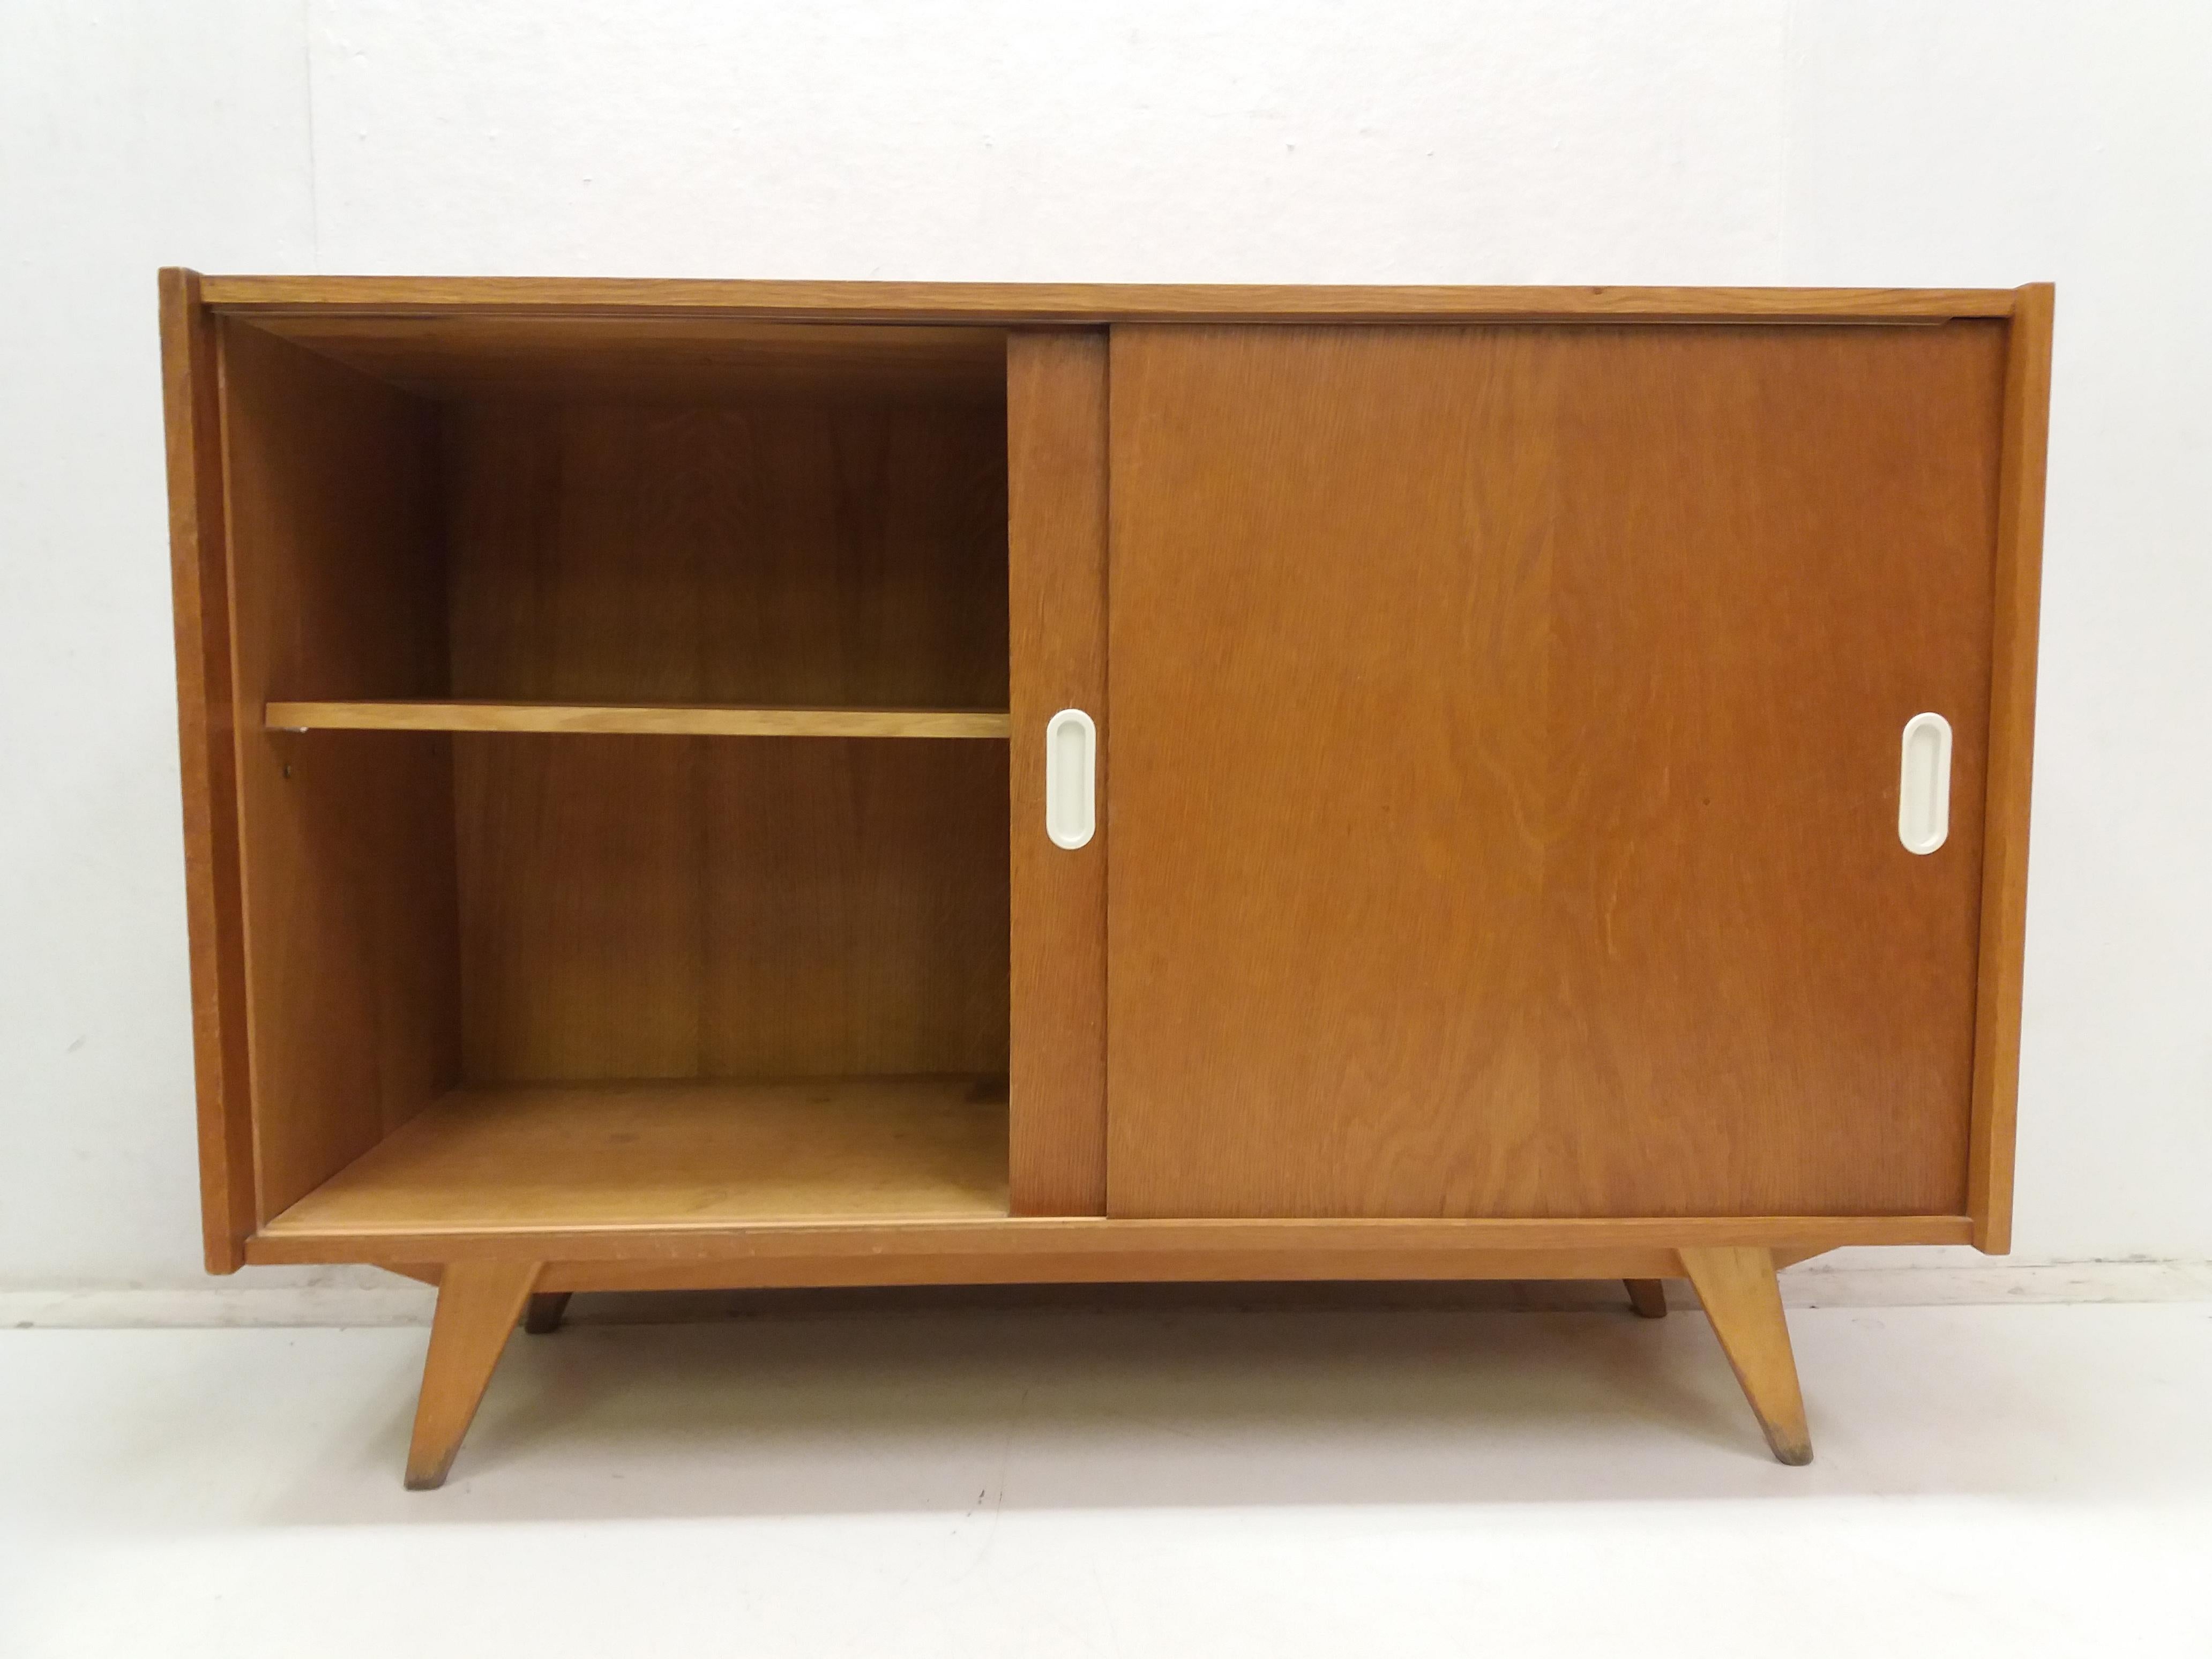 1960 Retro Oak Chest of Drawers Jiroutek, Czechoslovakia In Good Condition For Sale In Praha, CZ